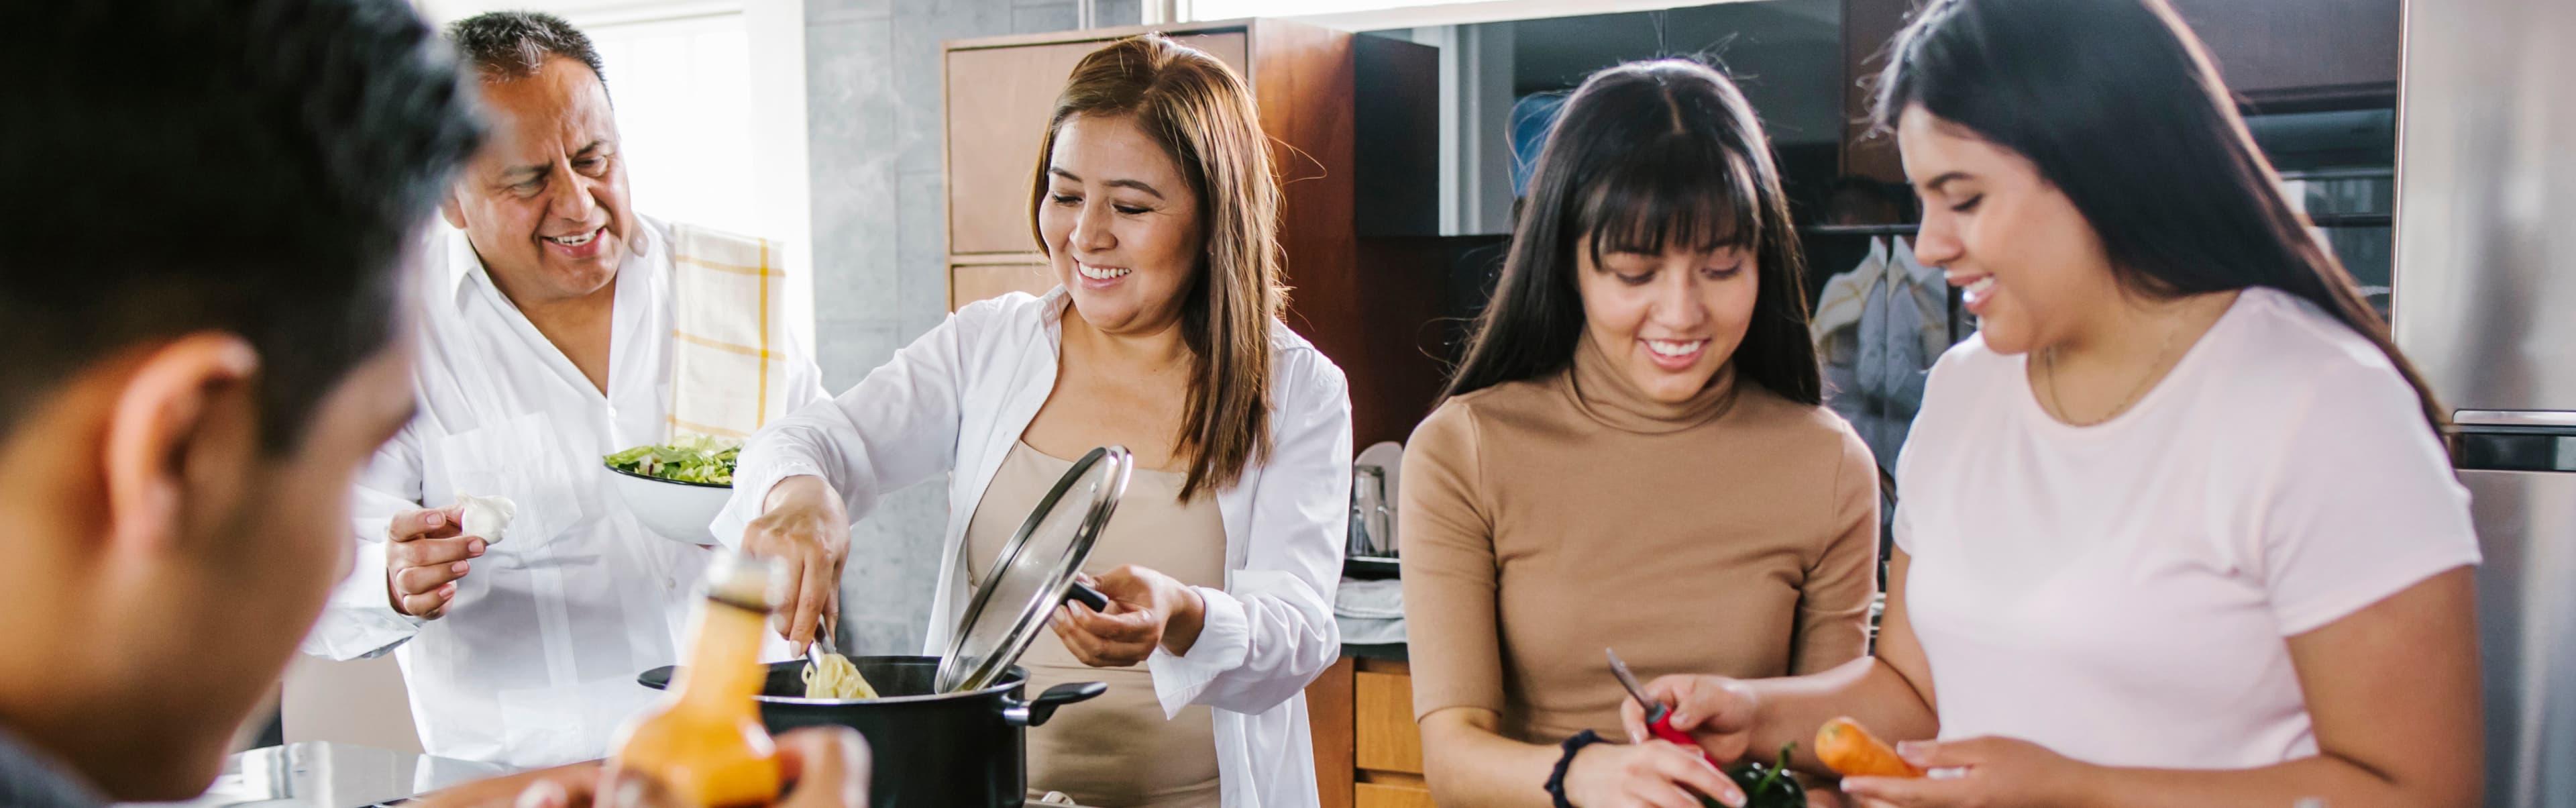 Three people cooking together in a kitchen, with one person standing nearby holding a plate—a perfect scene for a culinary case study using the McCormick app by ArcTouch.